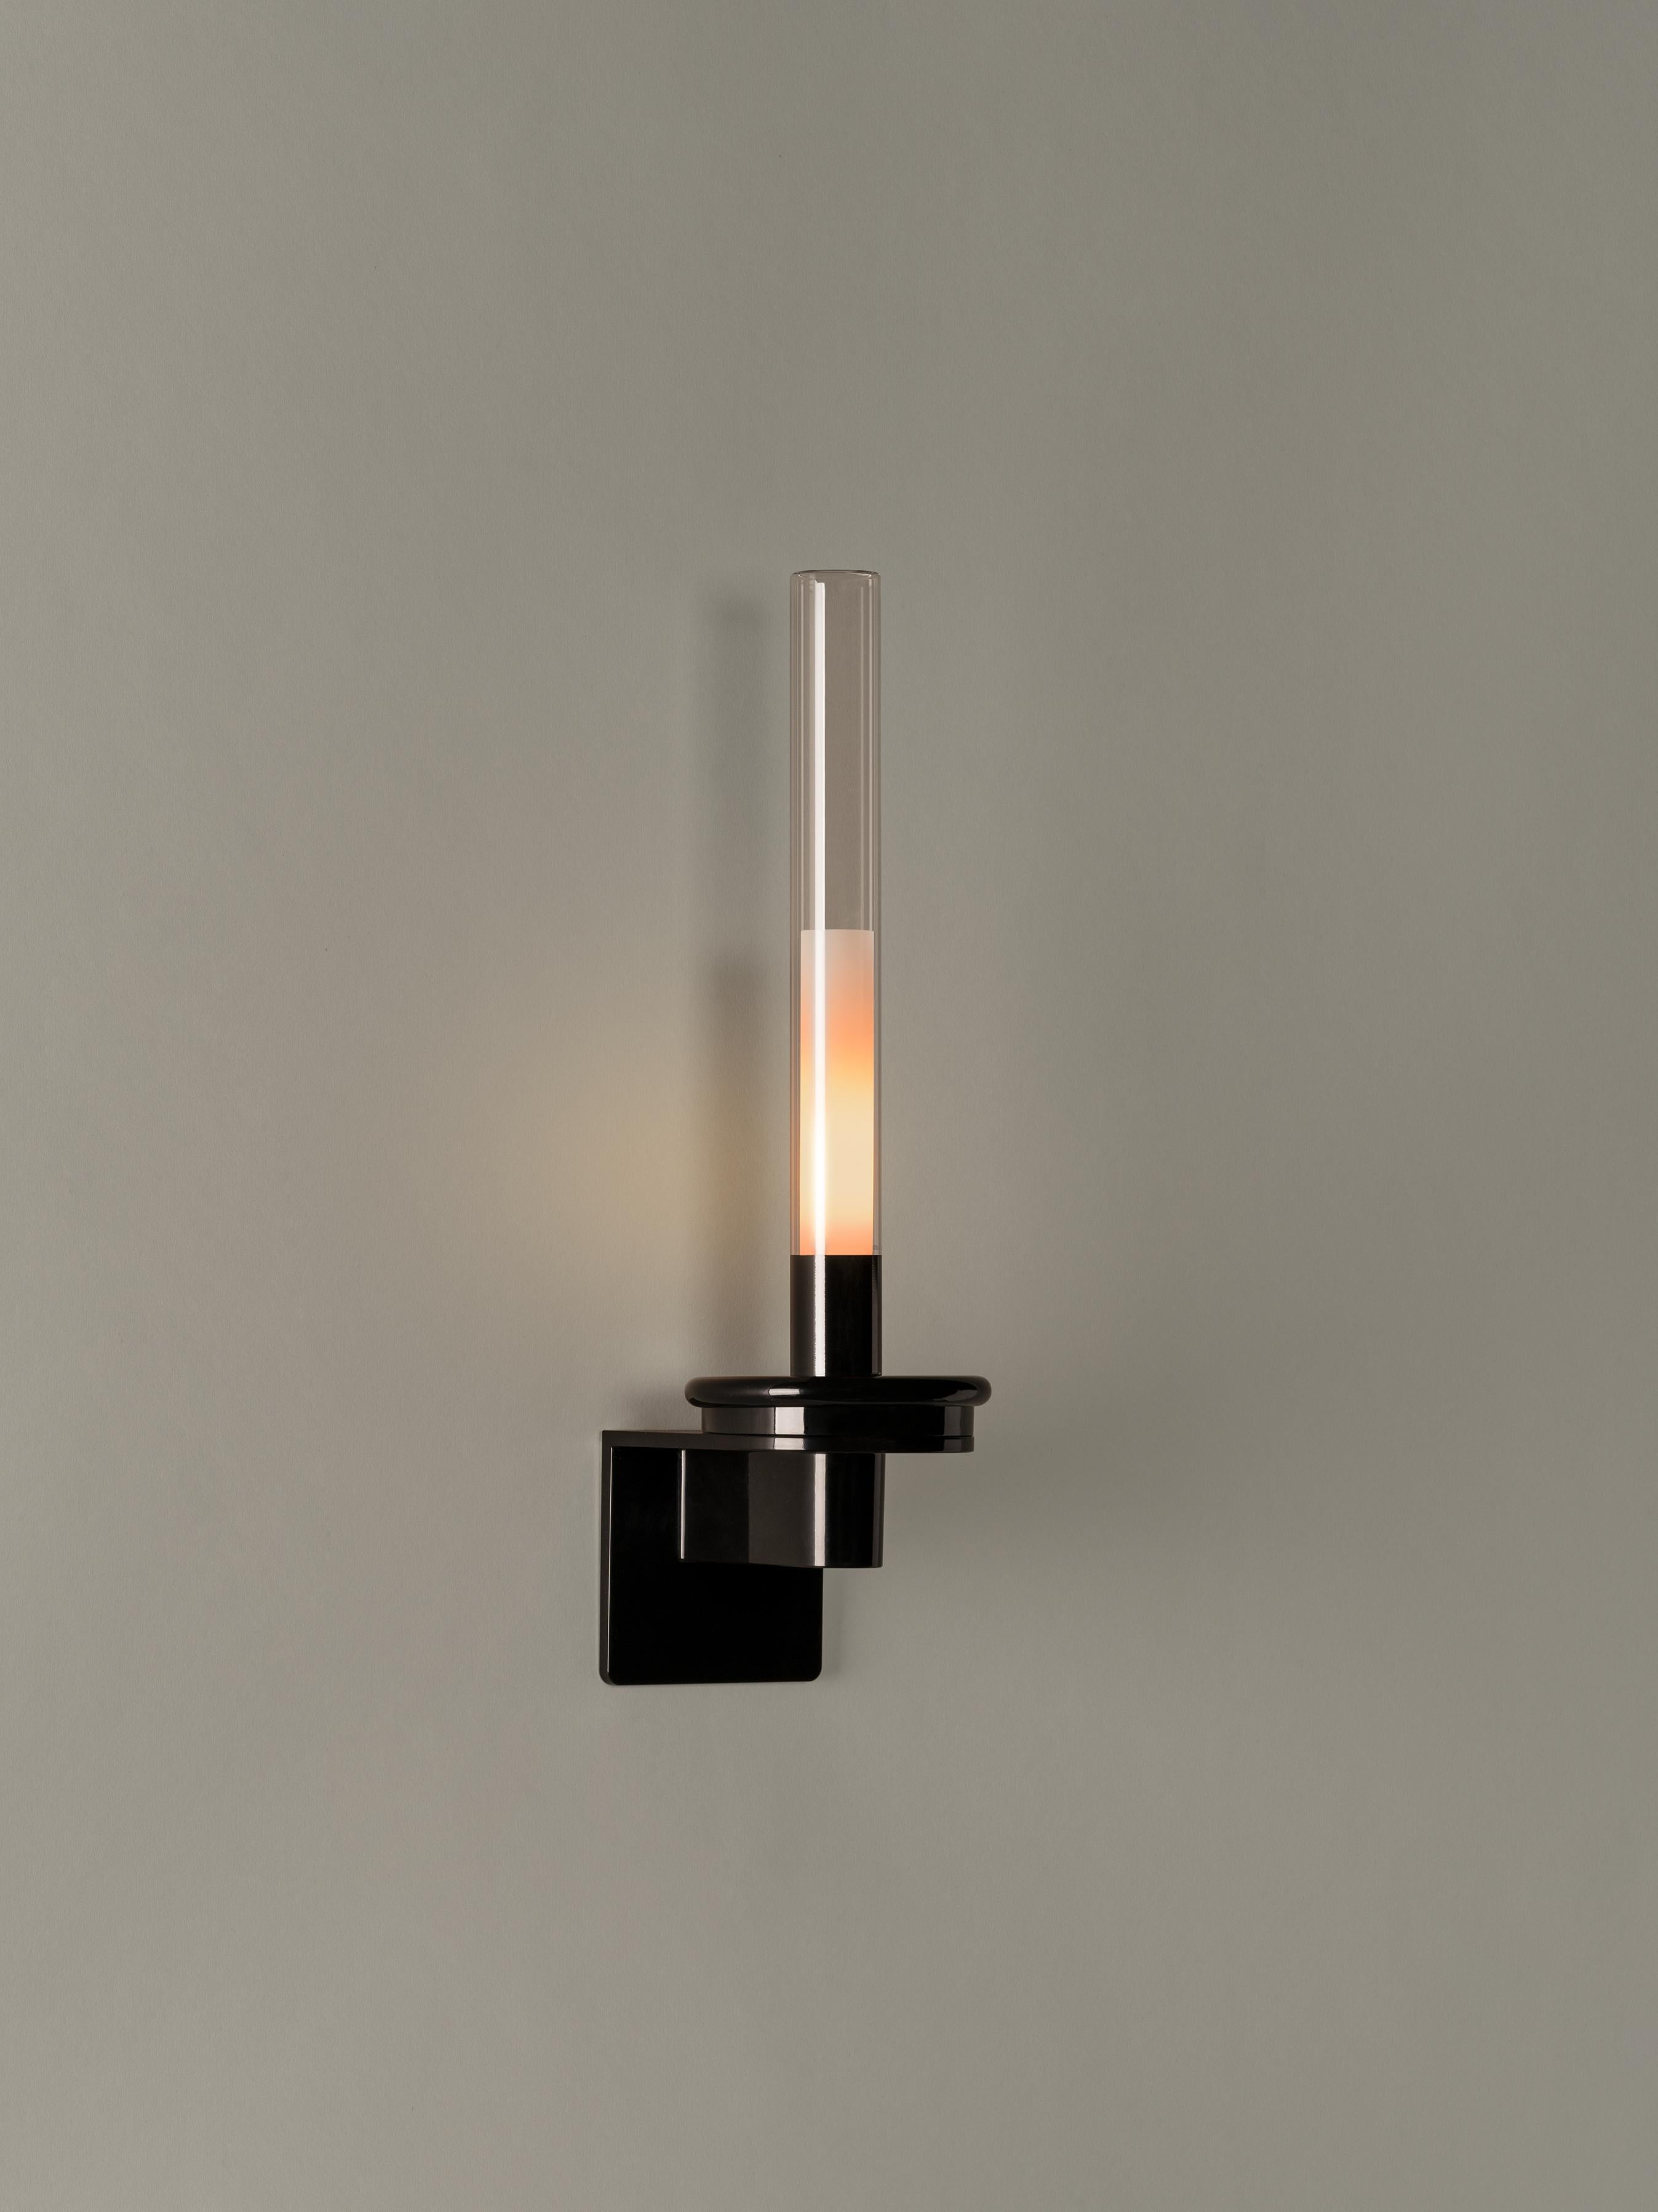 Sylvestrina wall lamp by Enric Sòria, Jordi Garcés
Dimensions: D 12.7 x W 15.1 x H 46 cm
Materials: Metal, glass.

This wall lamp has a circular metal base finished in shiny black and a cylindrical glass shade that diffuses a warm light. Keeping